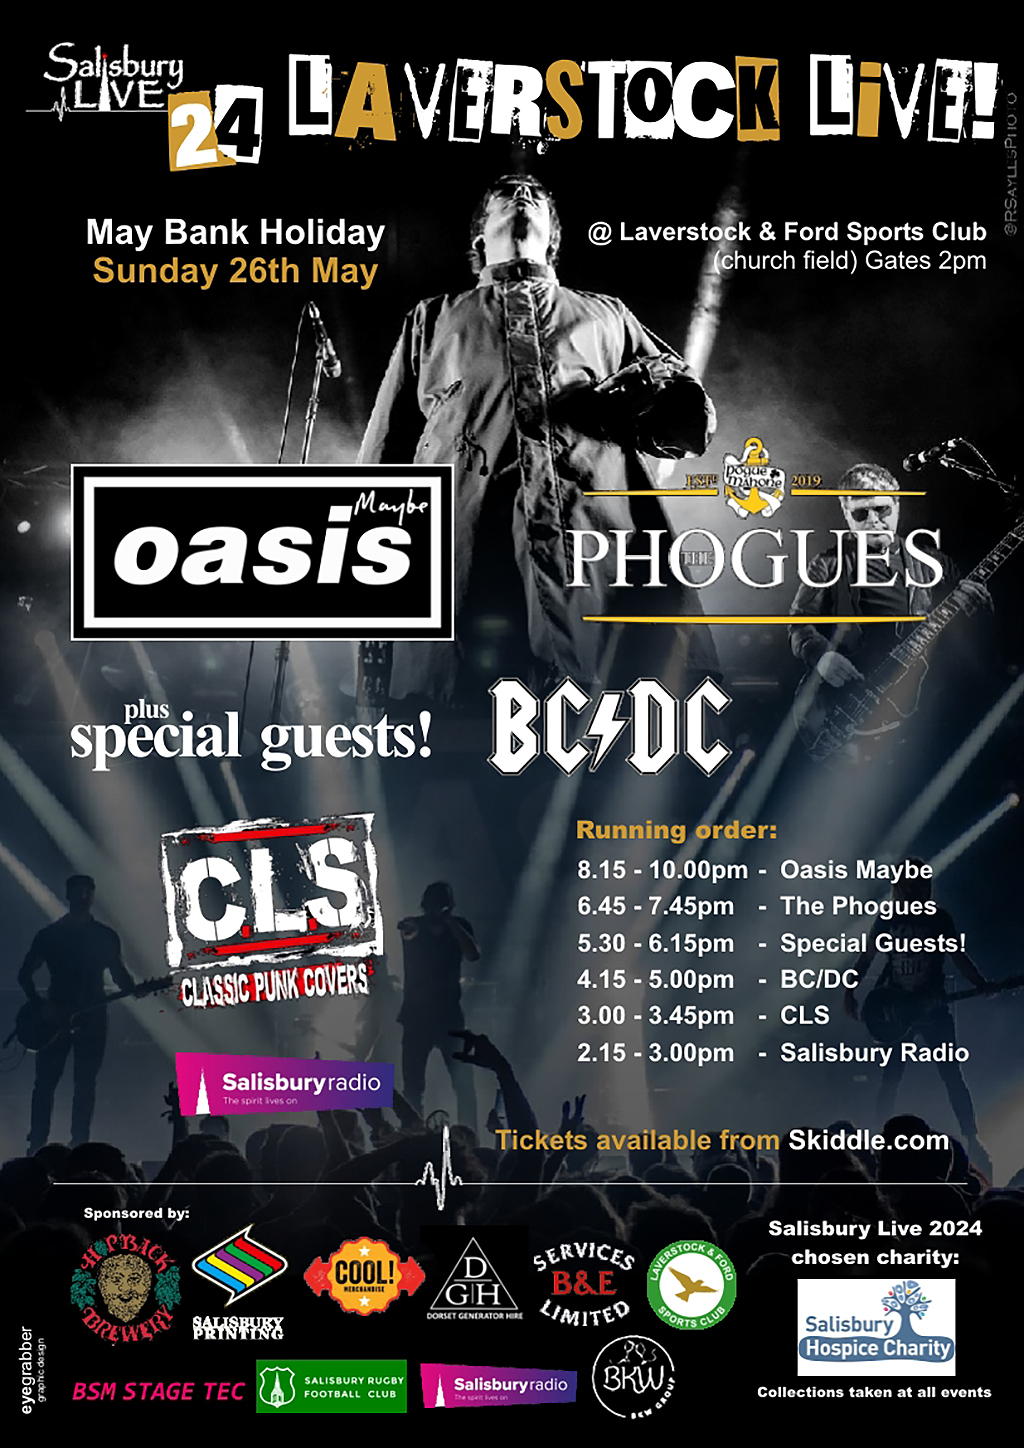 Salisbury Live 2024 - Laverstock Live! - Oasis Maybe + The Phogues + BC/DC (Break Cover does AC/DC) + CLS